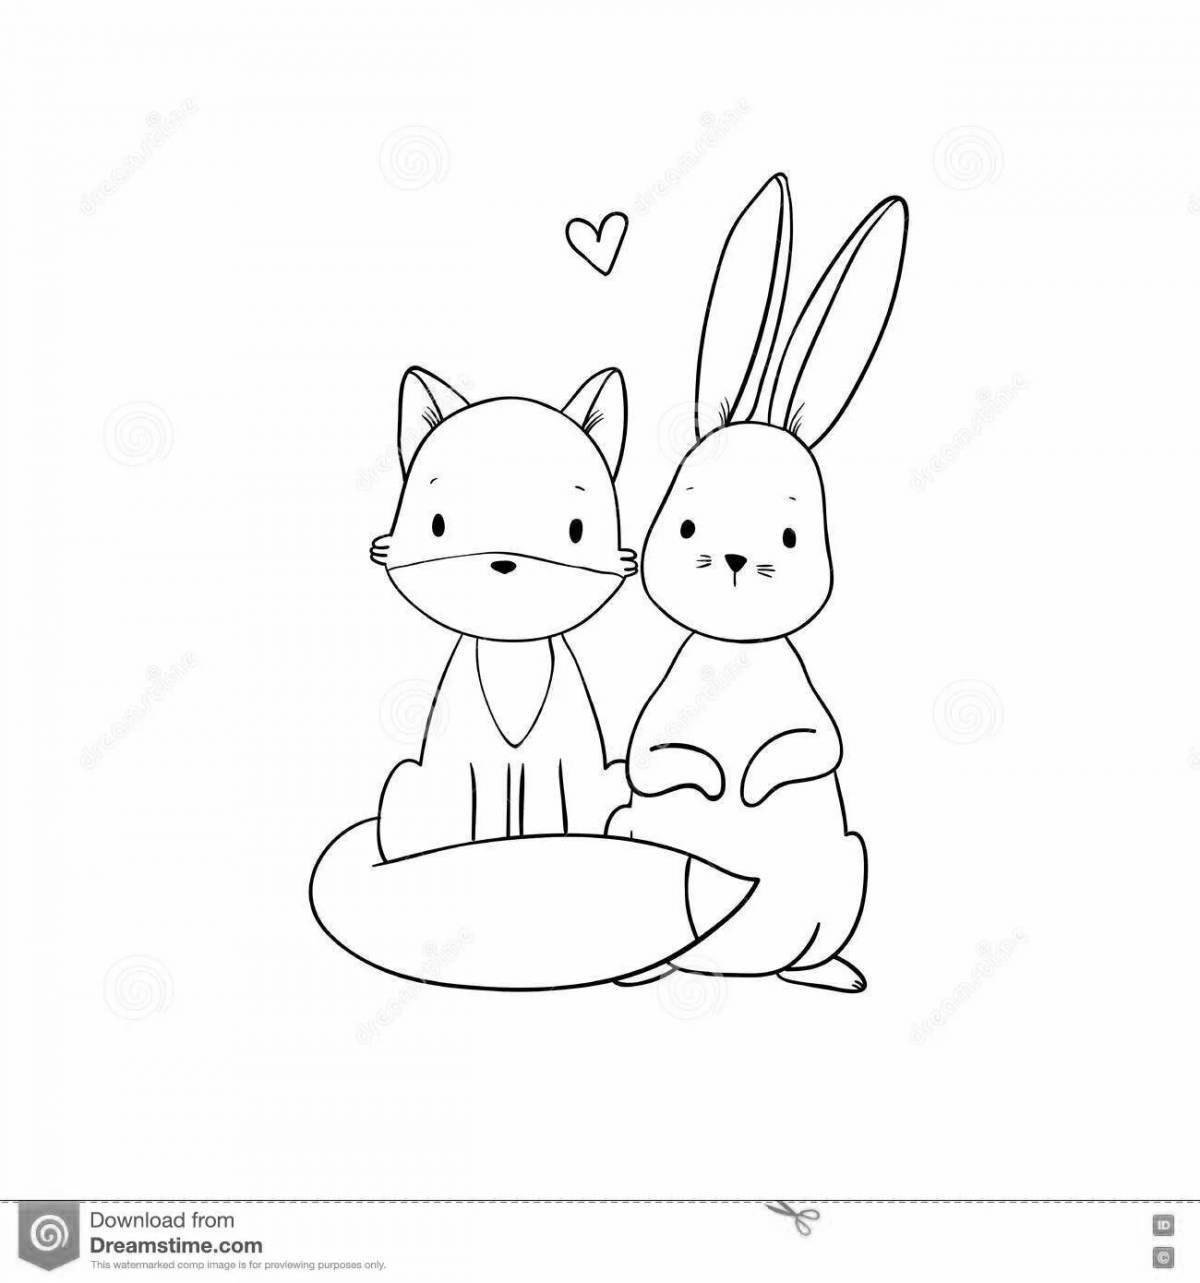 Cat and bunny #11